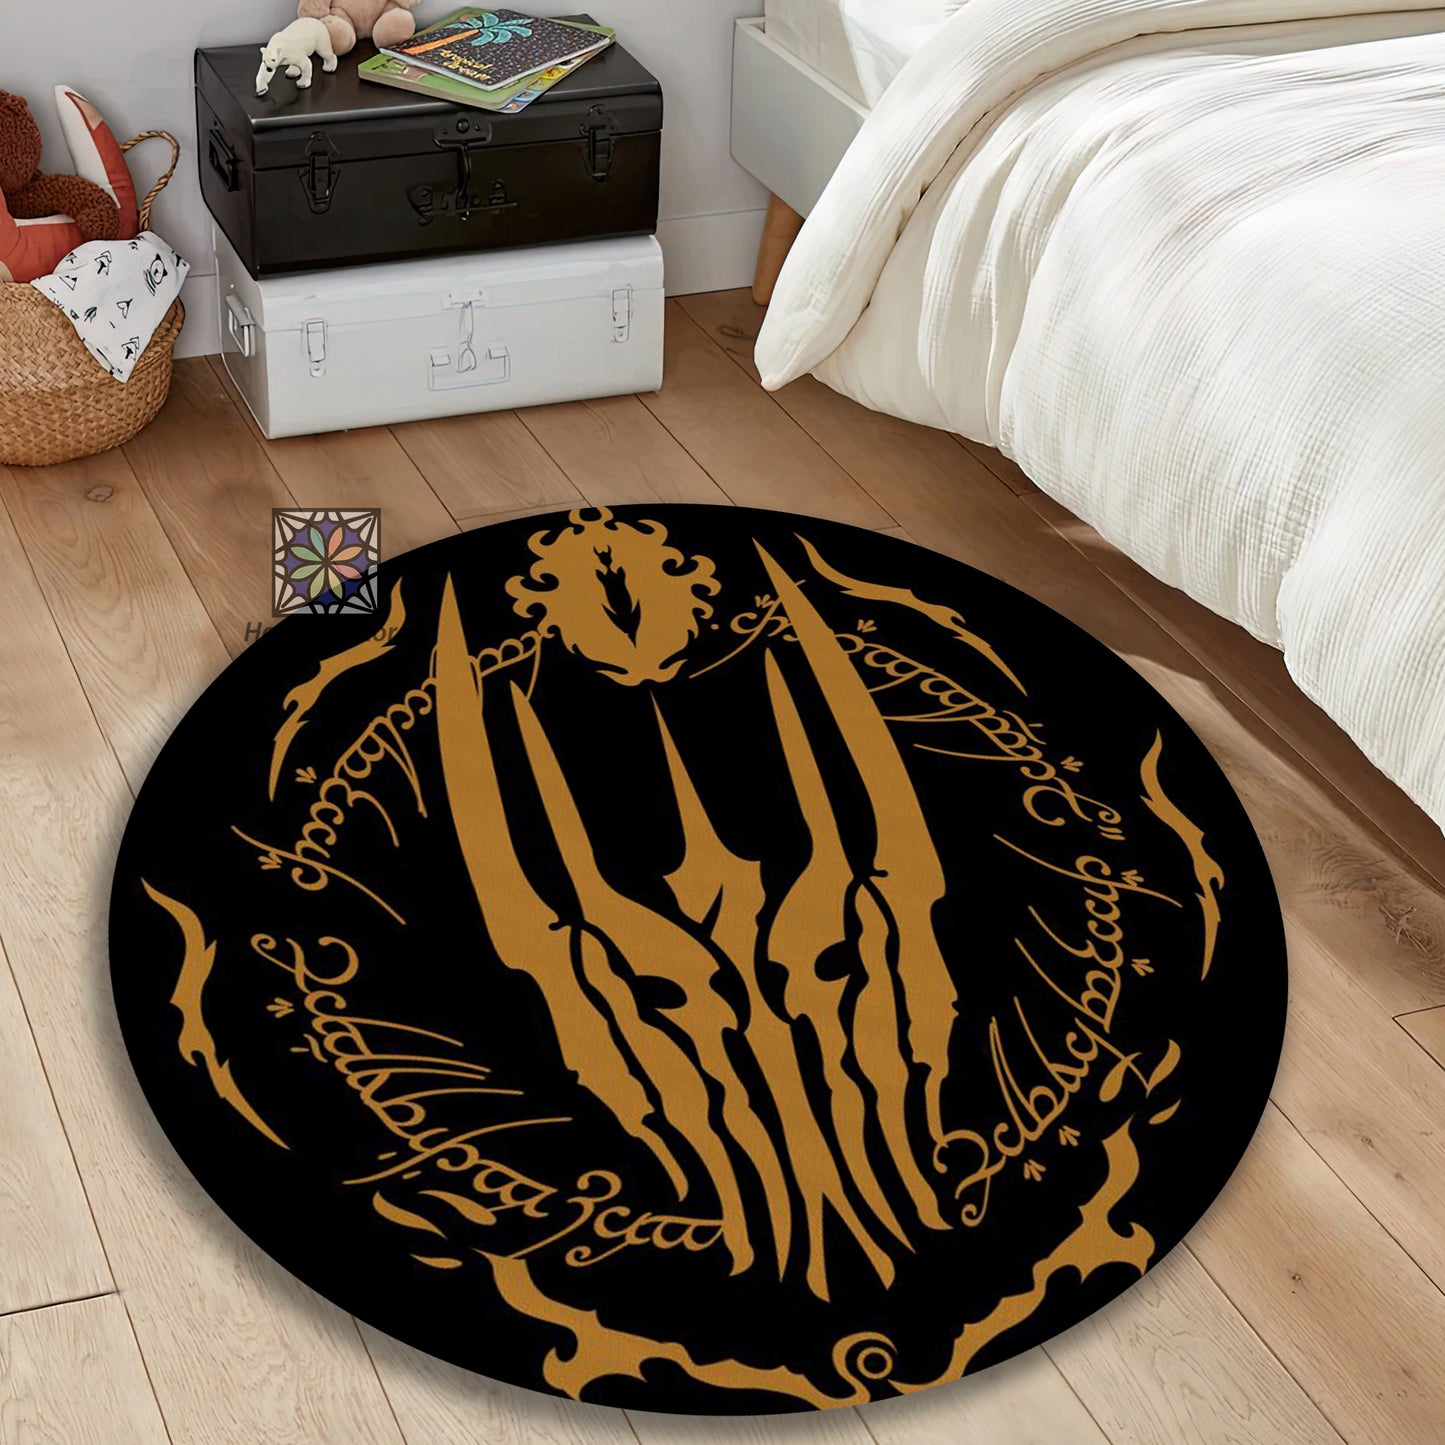 Lord Of the Rings Symbol Rug, Sauron’s Themed Carpet, Horror Movie Room Decor, Fantastic Movie Mat